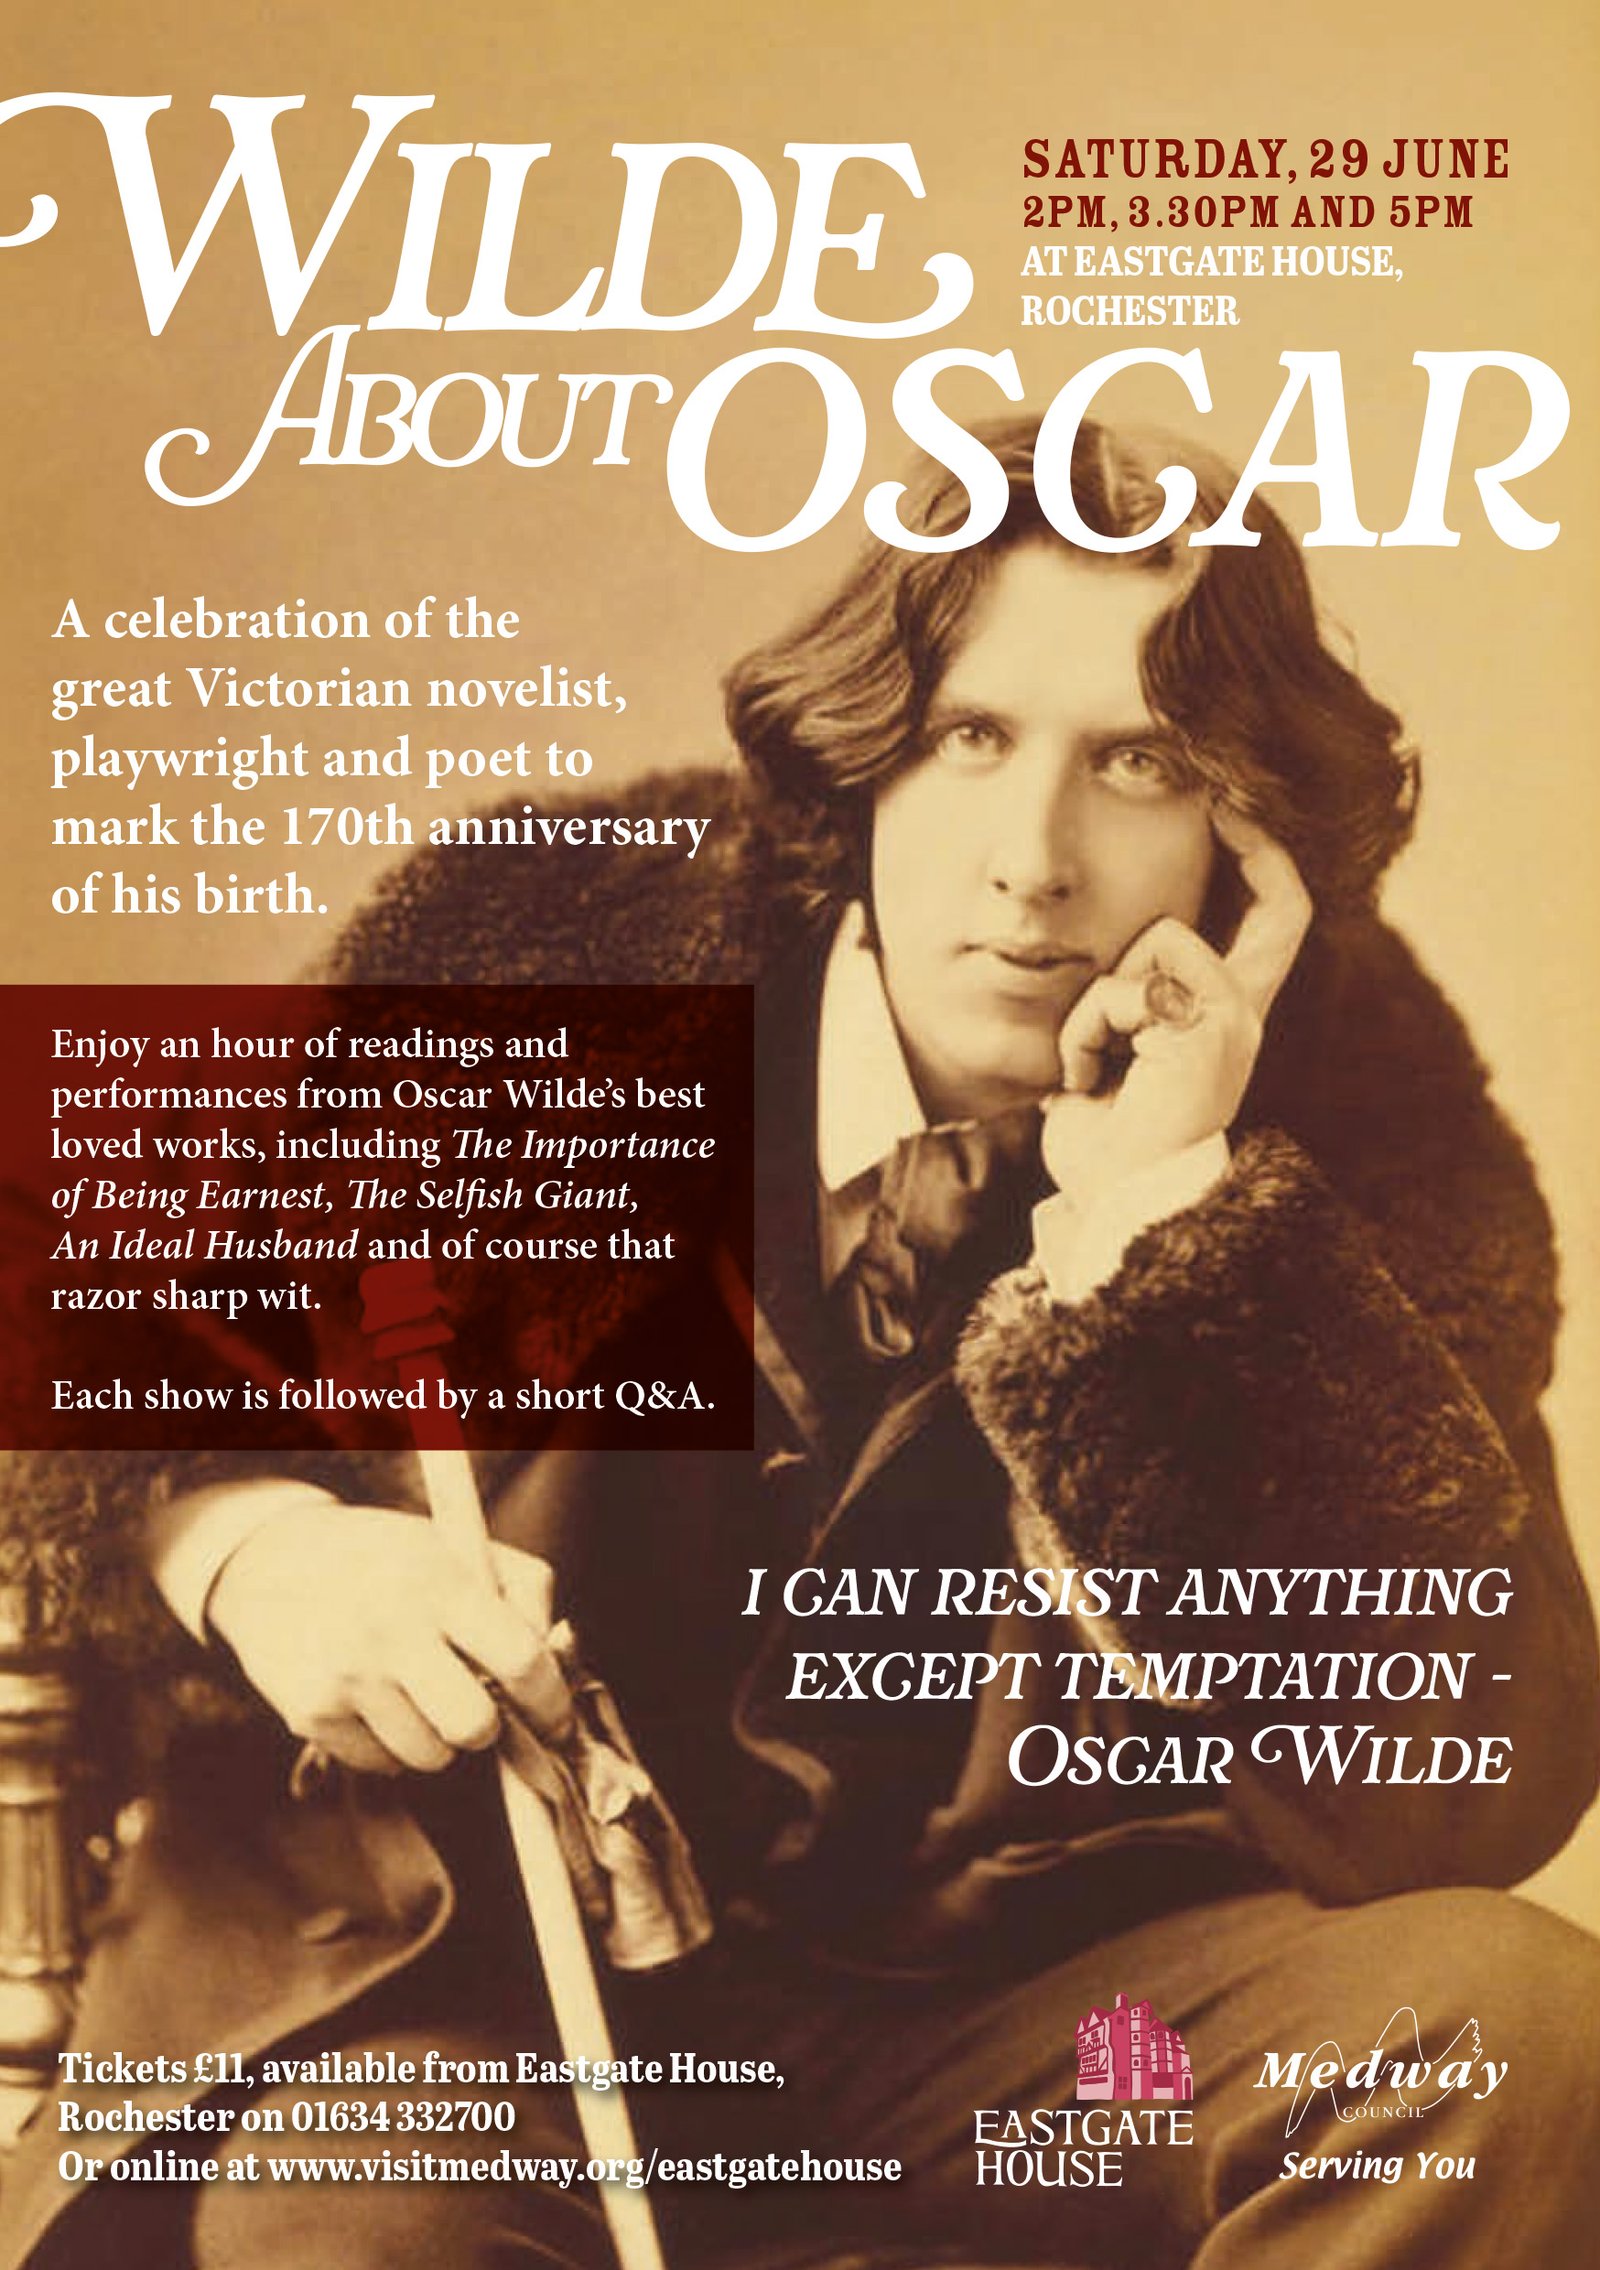 Flyer for the Wilde About Oscar show at Eastgate House